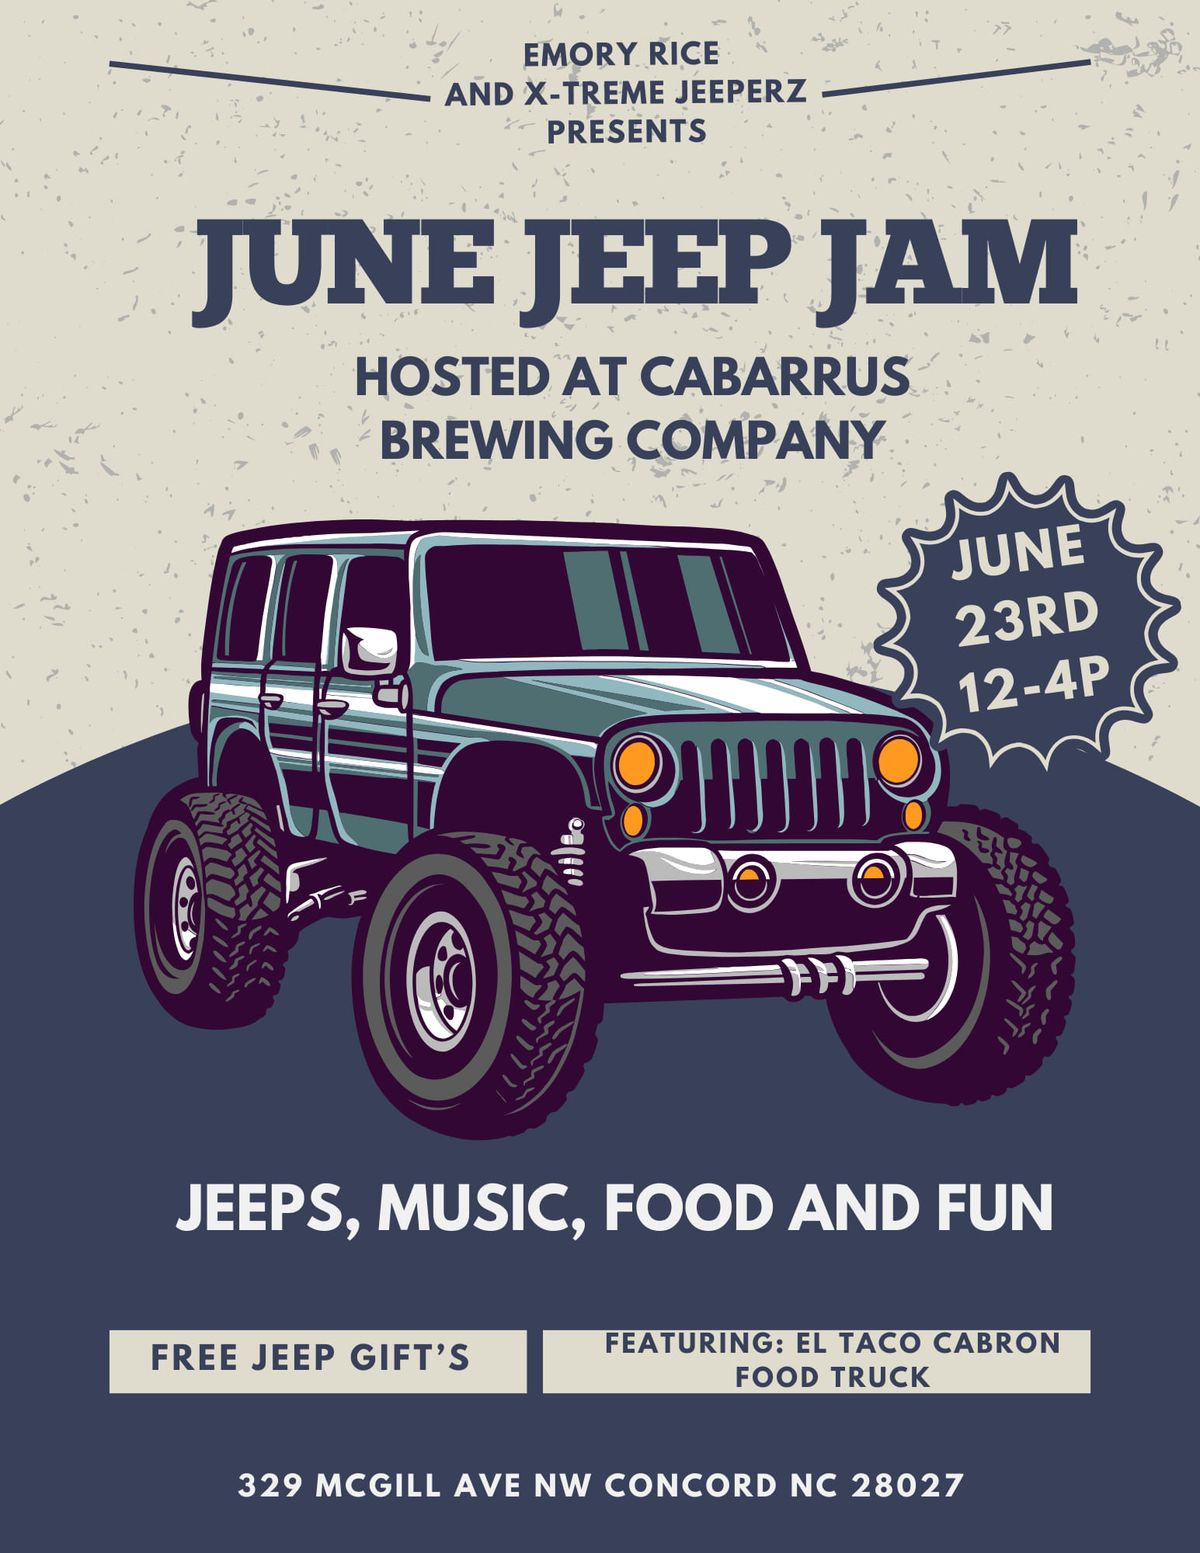 June Jeep Jam at Cabarrus Brewing Company